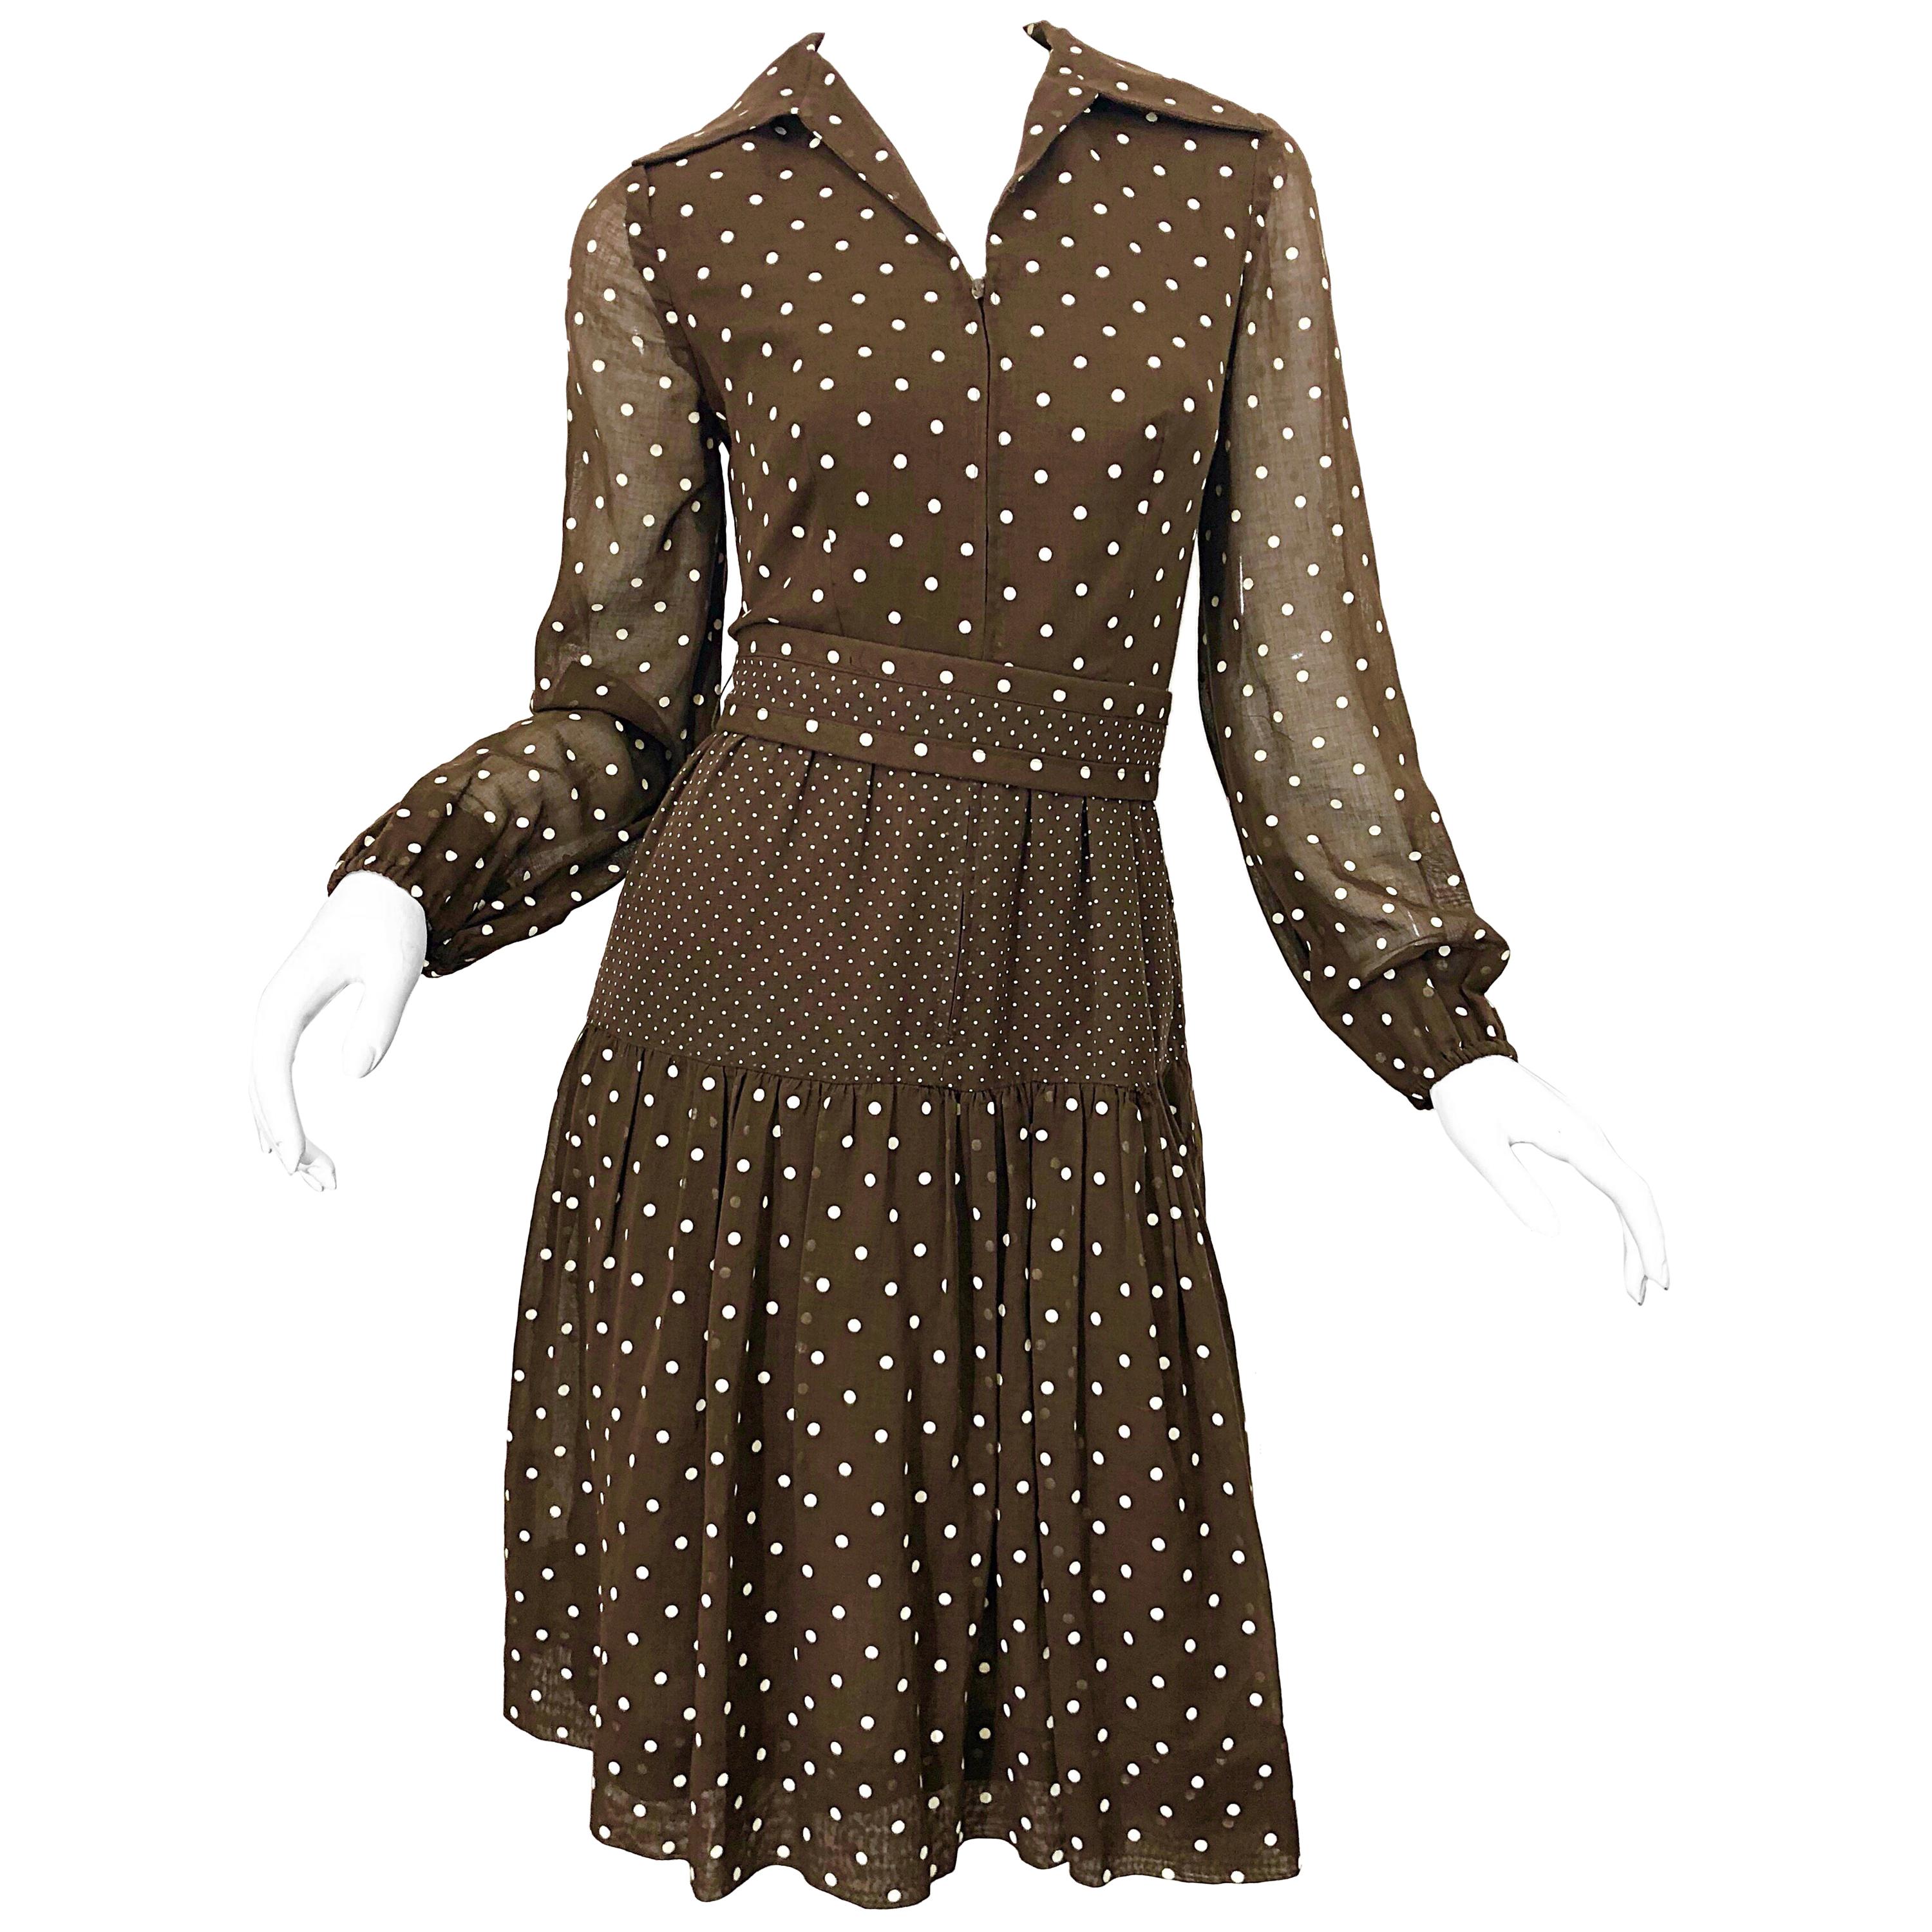 1970s I Magnin Brown and White Polka Dot Belted Cotton Vintage 70s Day Dress